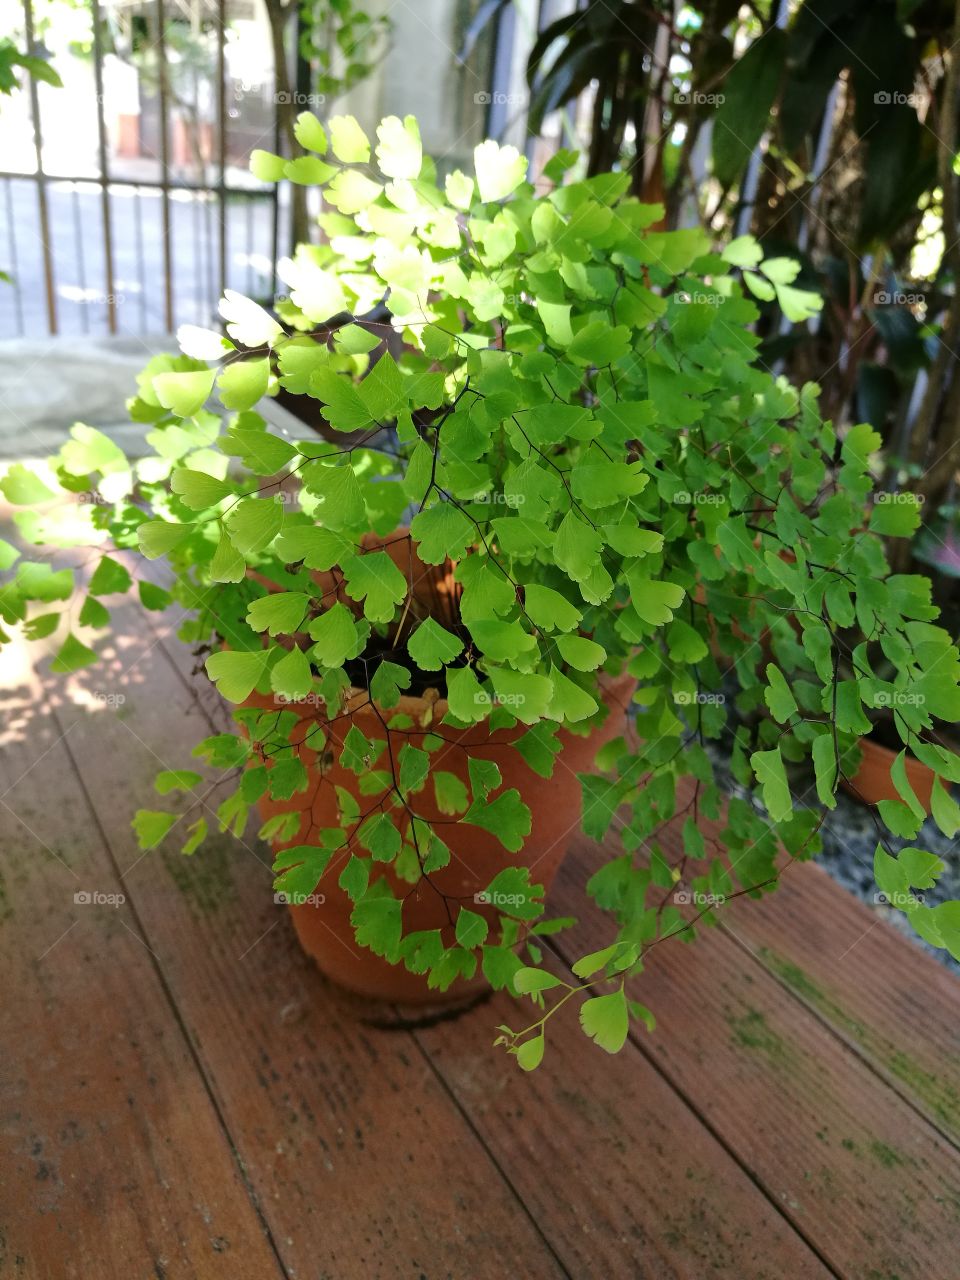 Maidenhair fern with sunlight on green leaves.